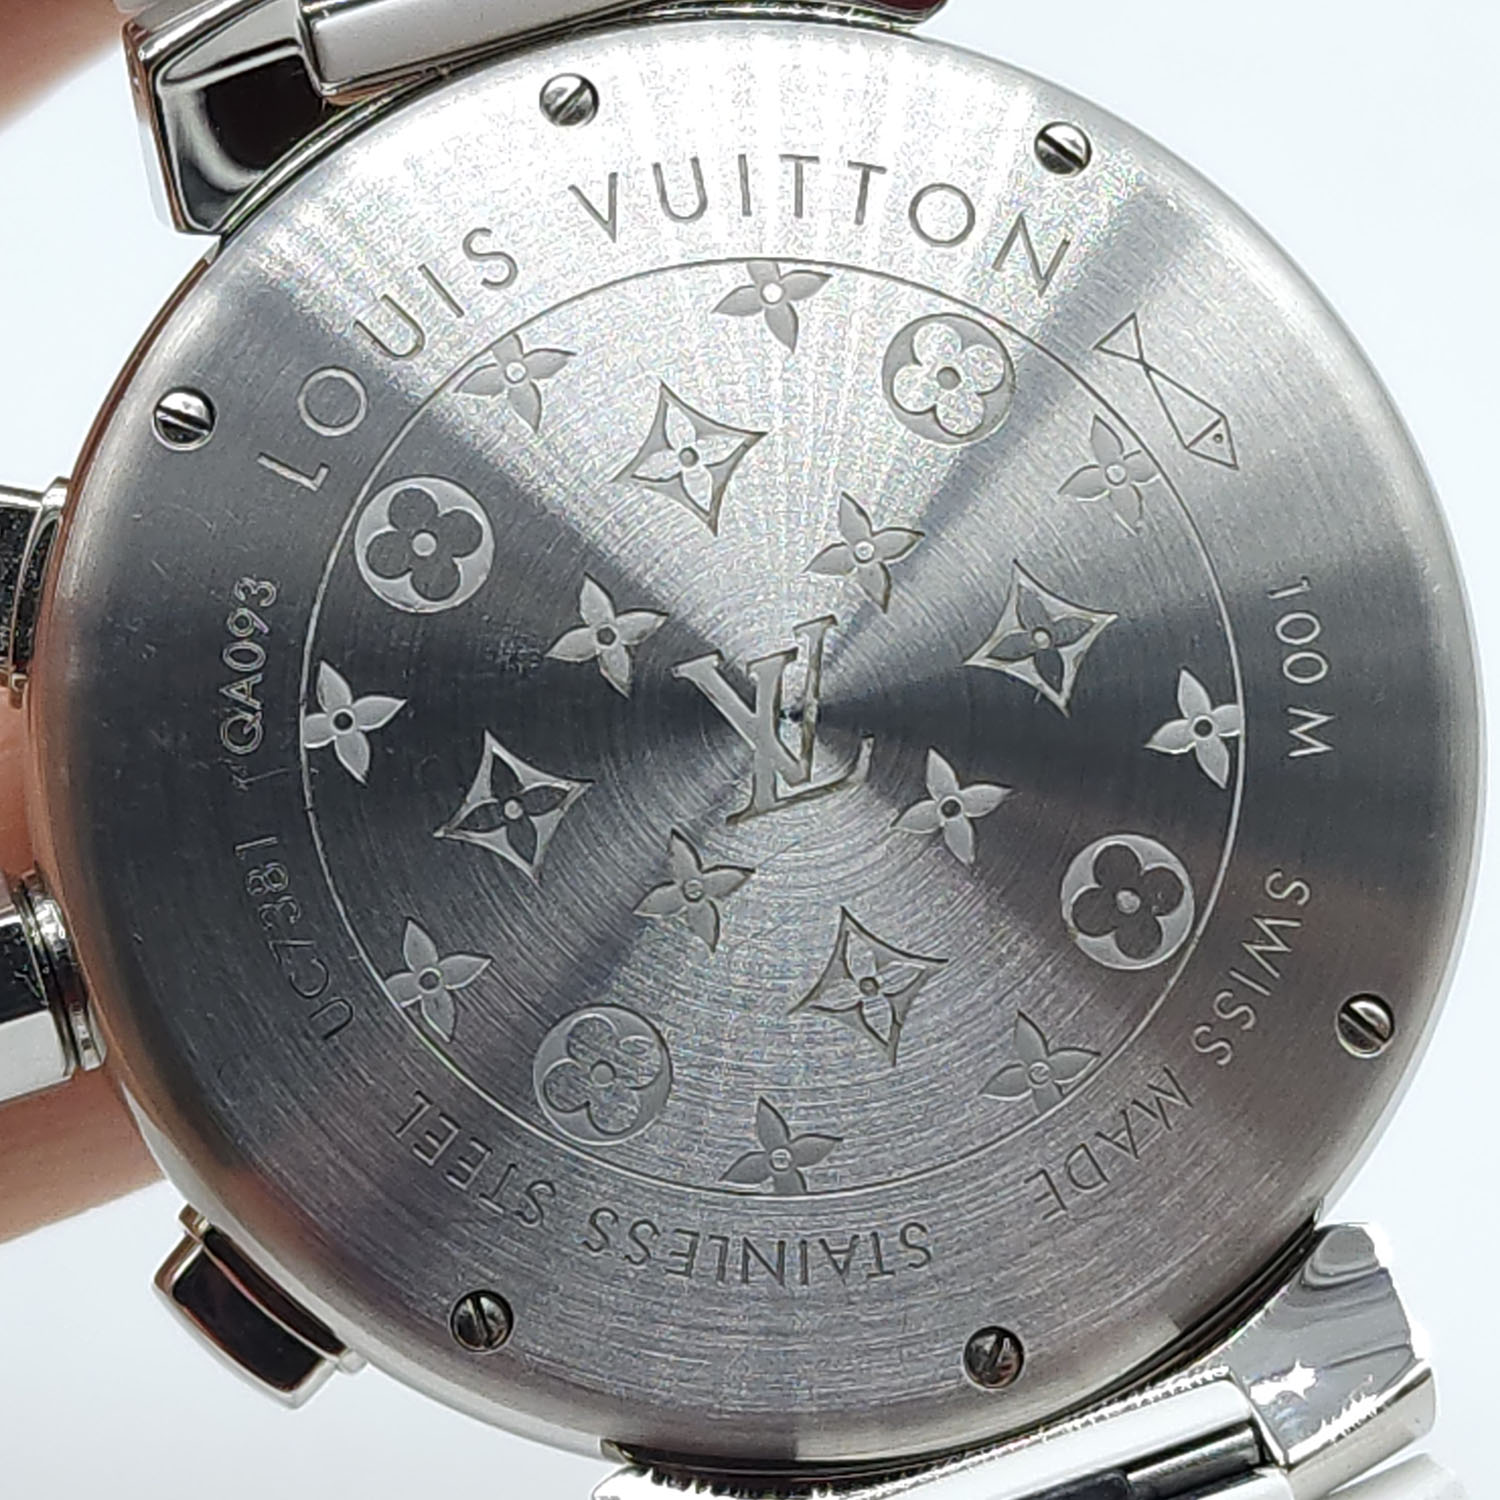 Louis Vuitton Tambour New Wave 39.5 mm chronograph watch